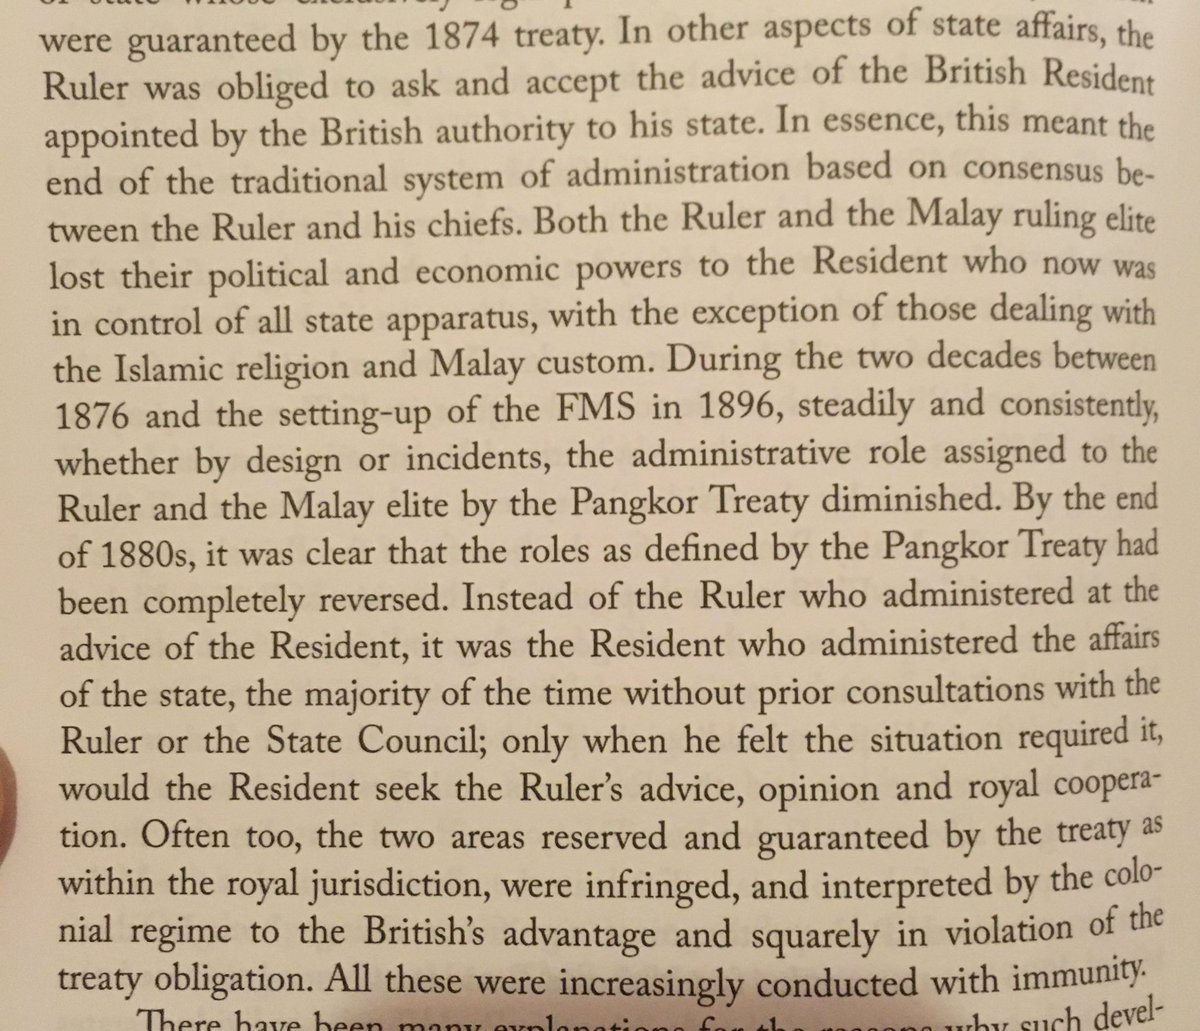 20 years after Pangkor, the roles of the sultan and the resident were completely reversed. The sultan was the advisorThe resident was the ruler